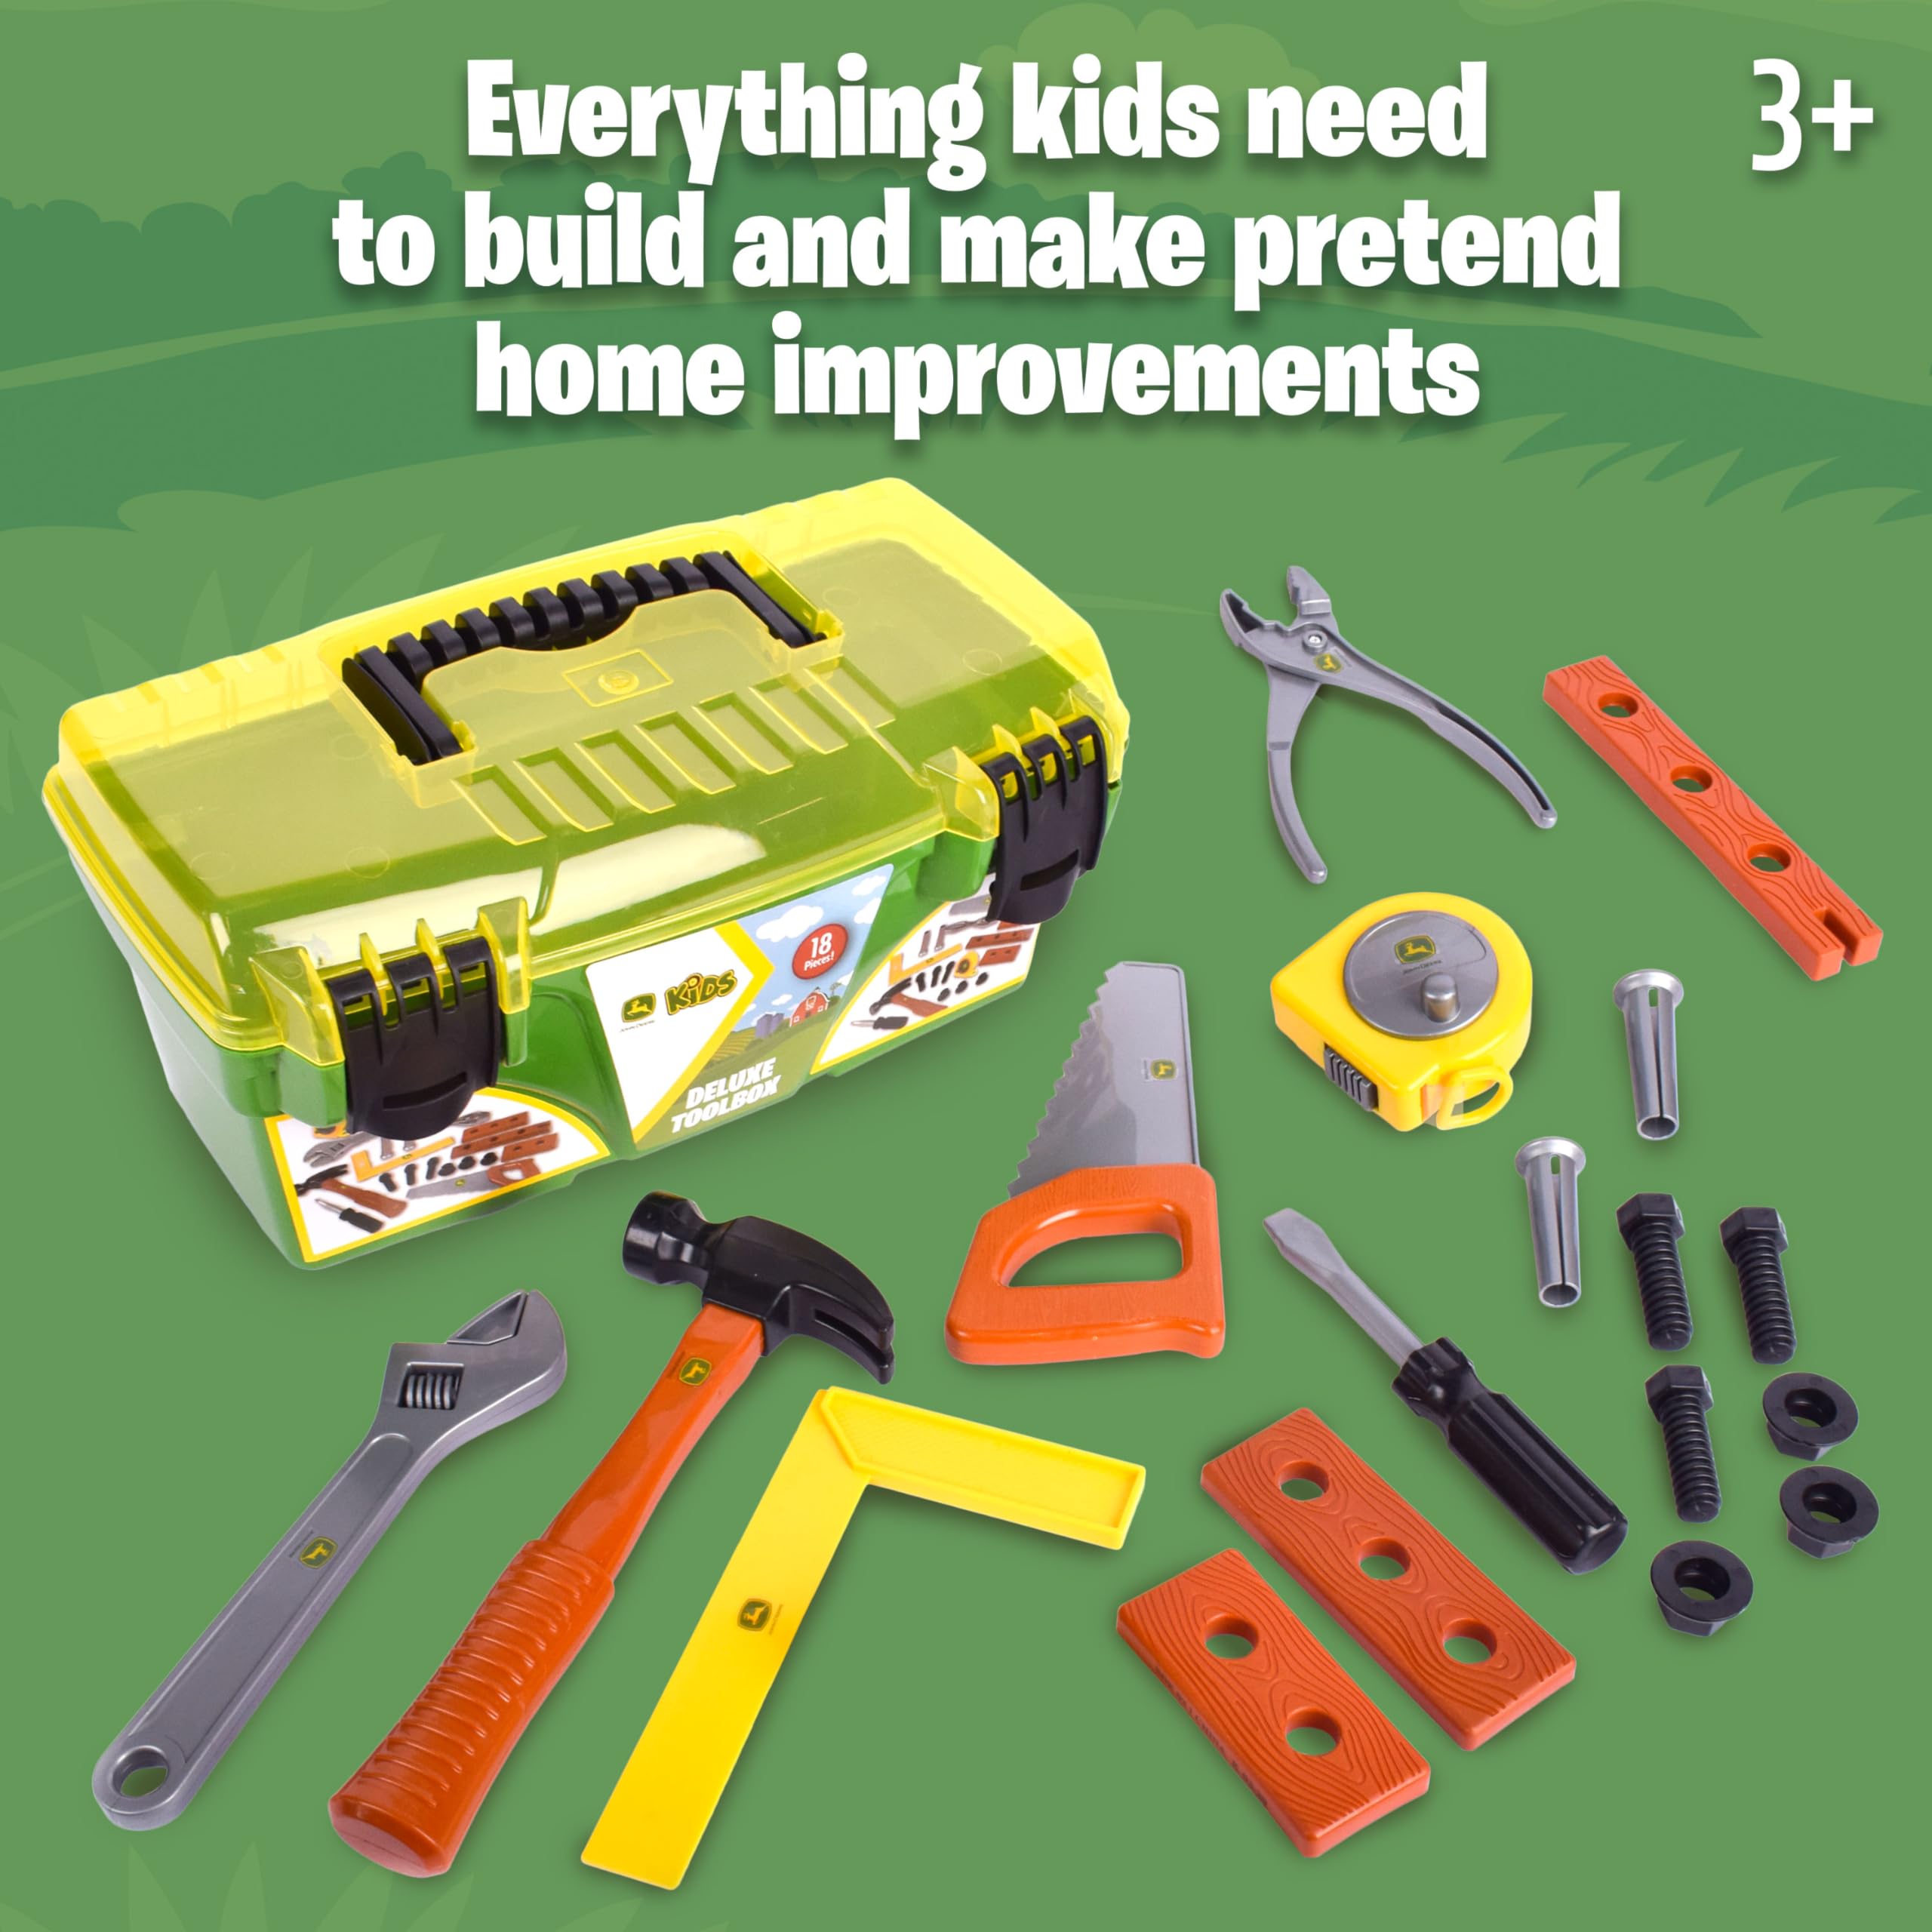 Sunny Days Entertainment John Deere 18 Piece Deluxe Tool Box – Construction Playset with Tape Measure and More Tools